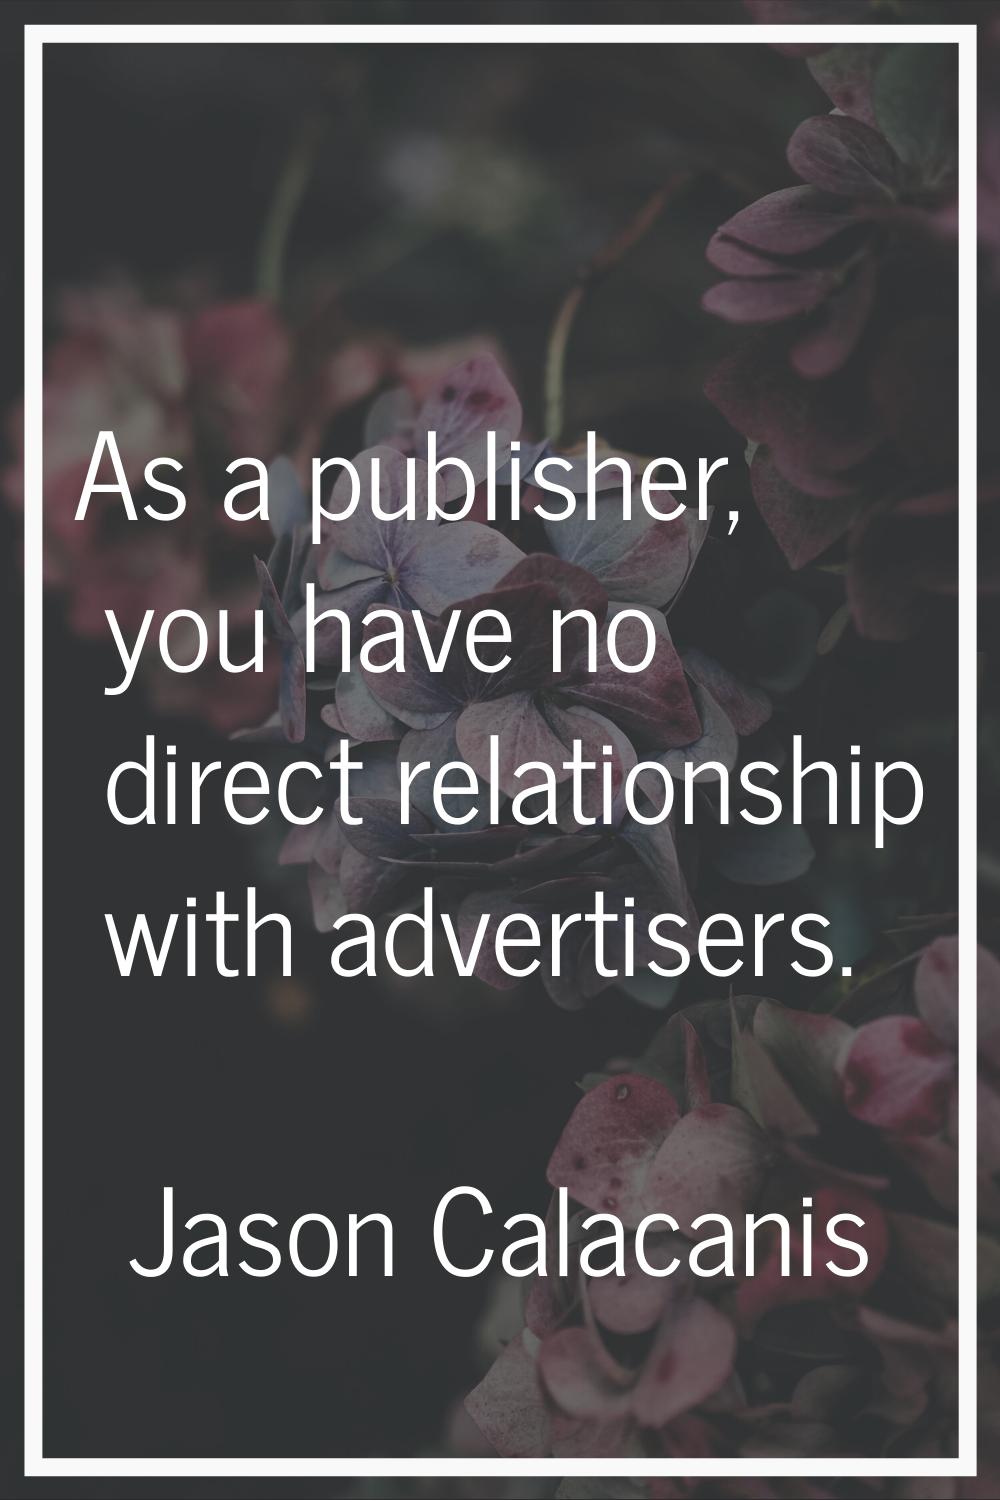 As a publisher, you have no direct relationship with advertisers.